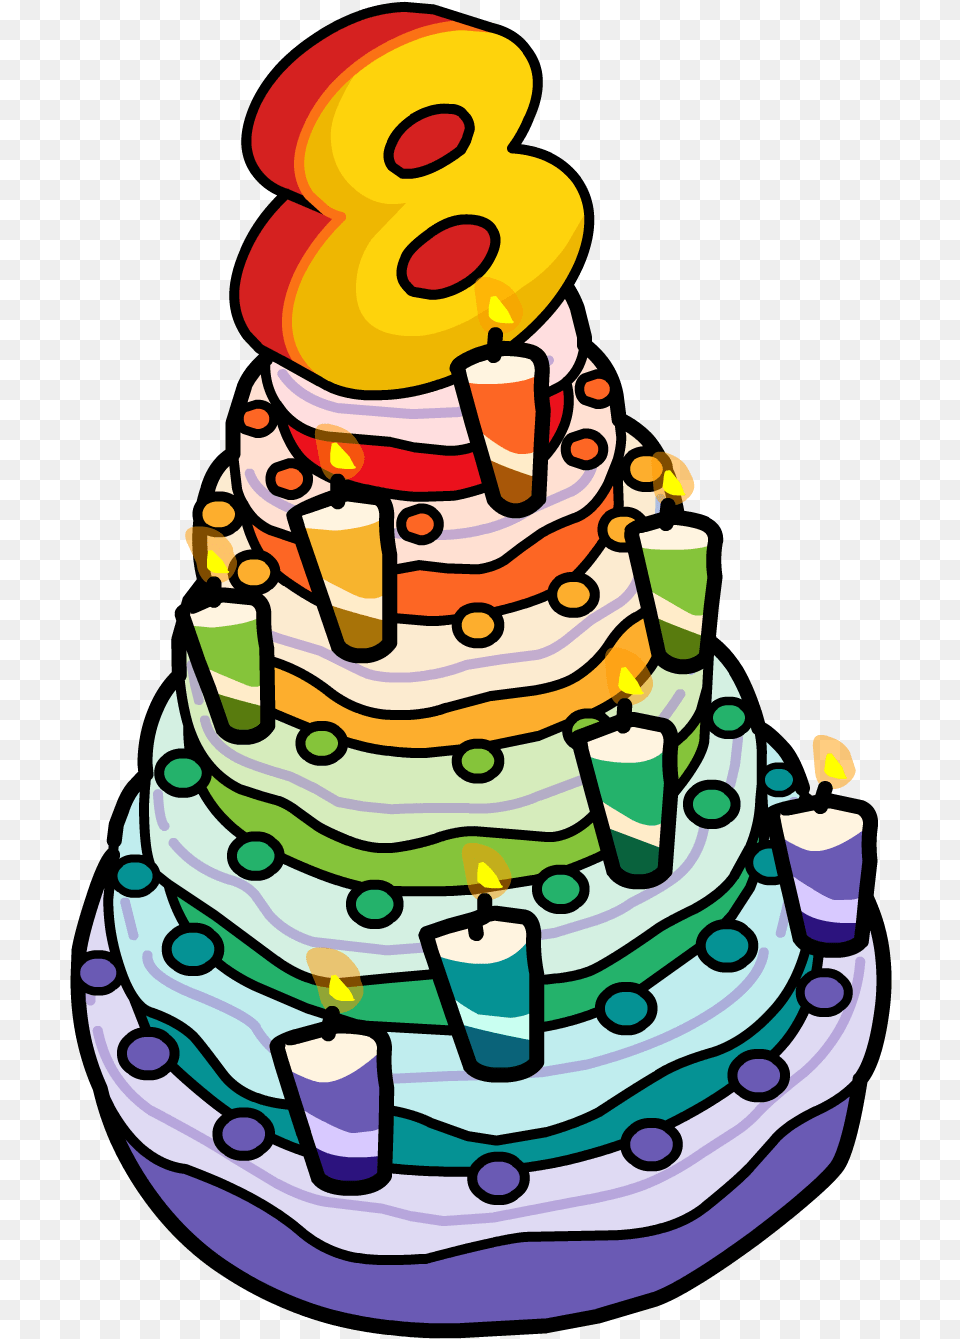 Download Hd 8th Anniversary Party Cake Birthday Cake 8 8 Birthday Cake, Birthday Cake, Cream, Dessert, Food Free Png